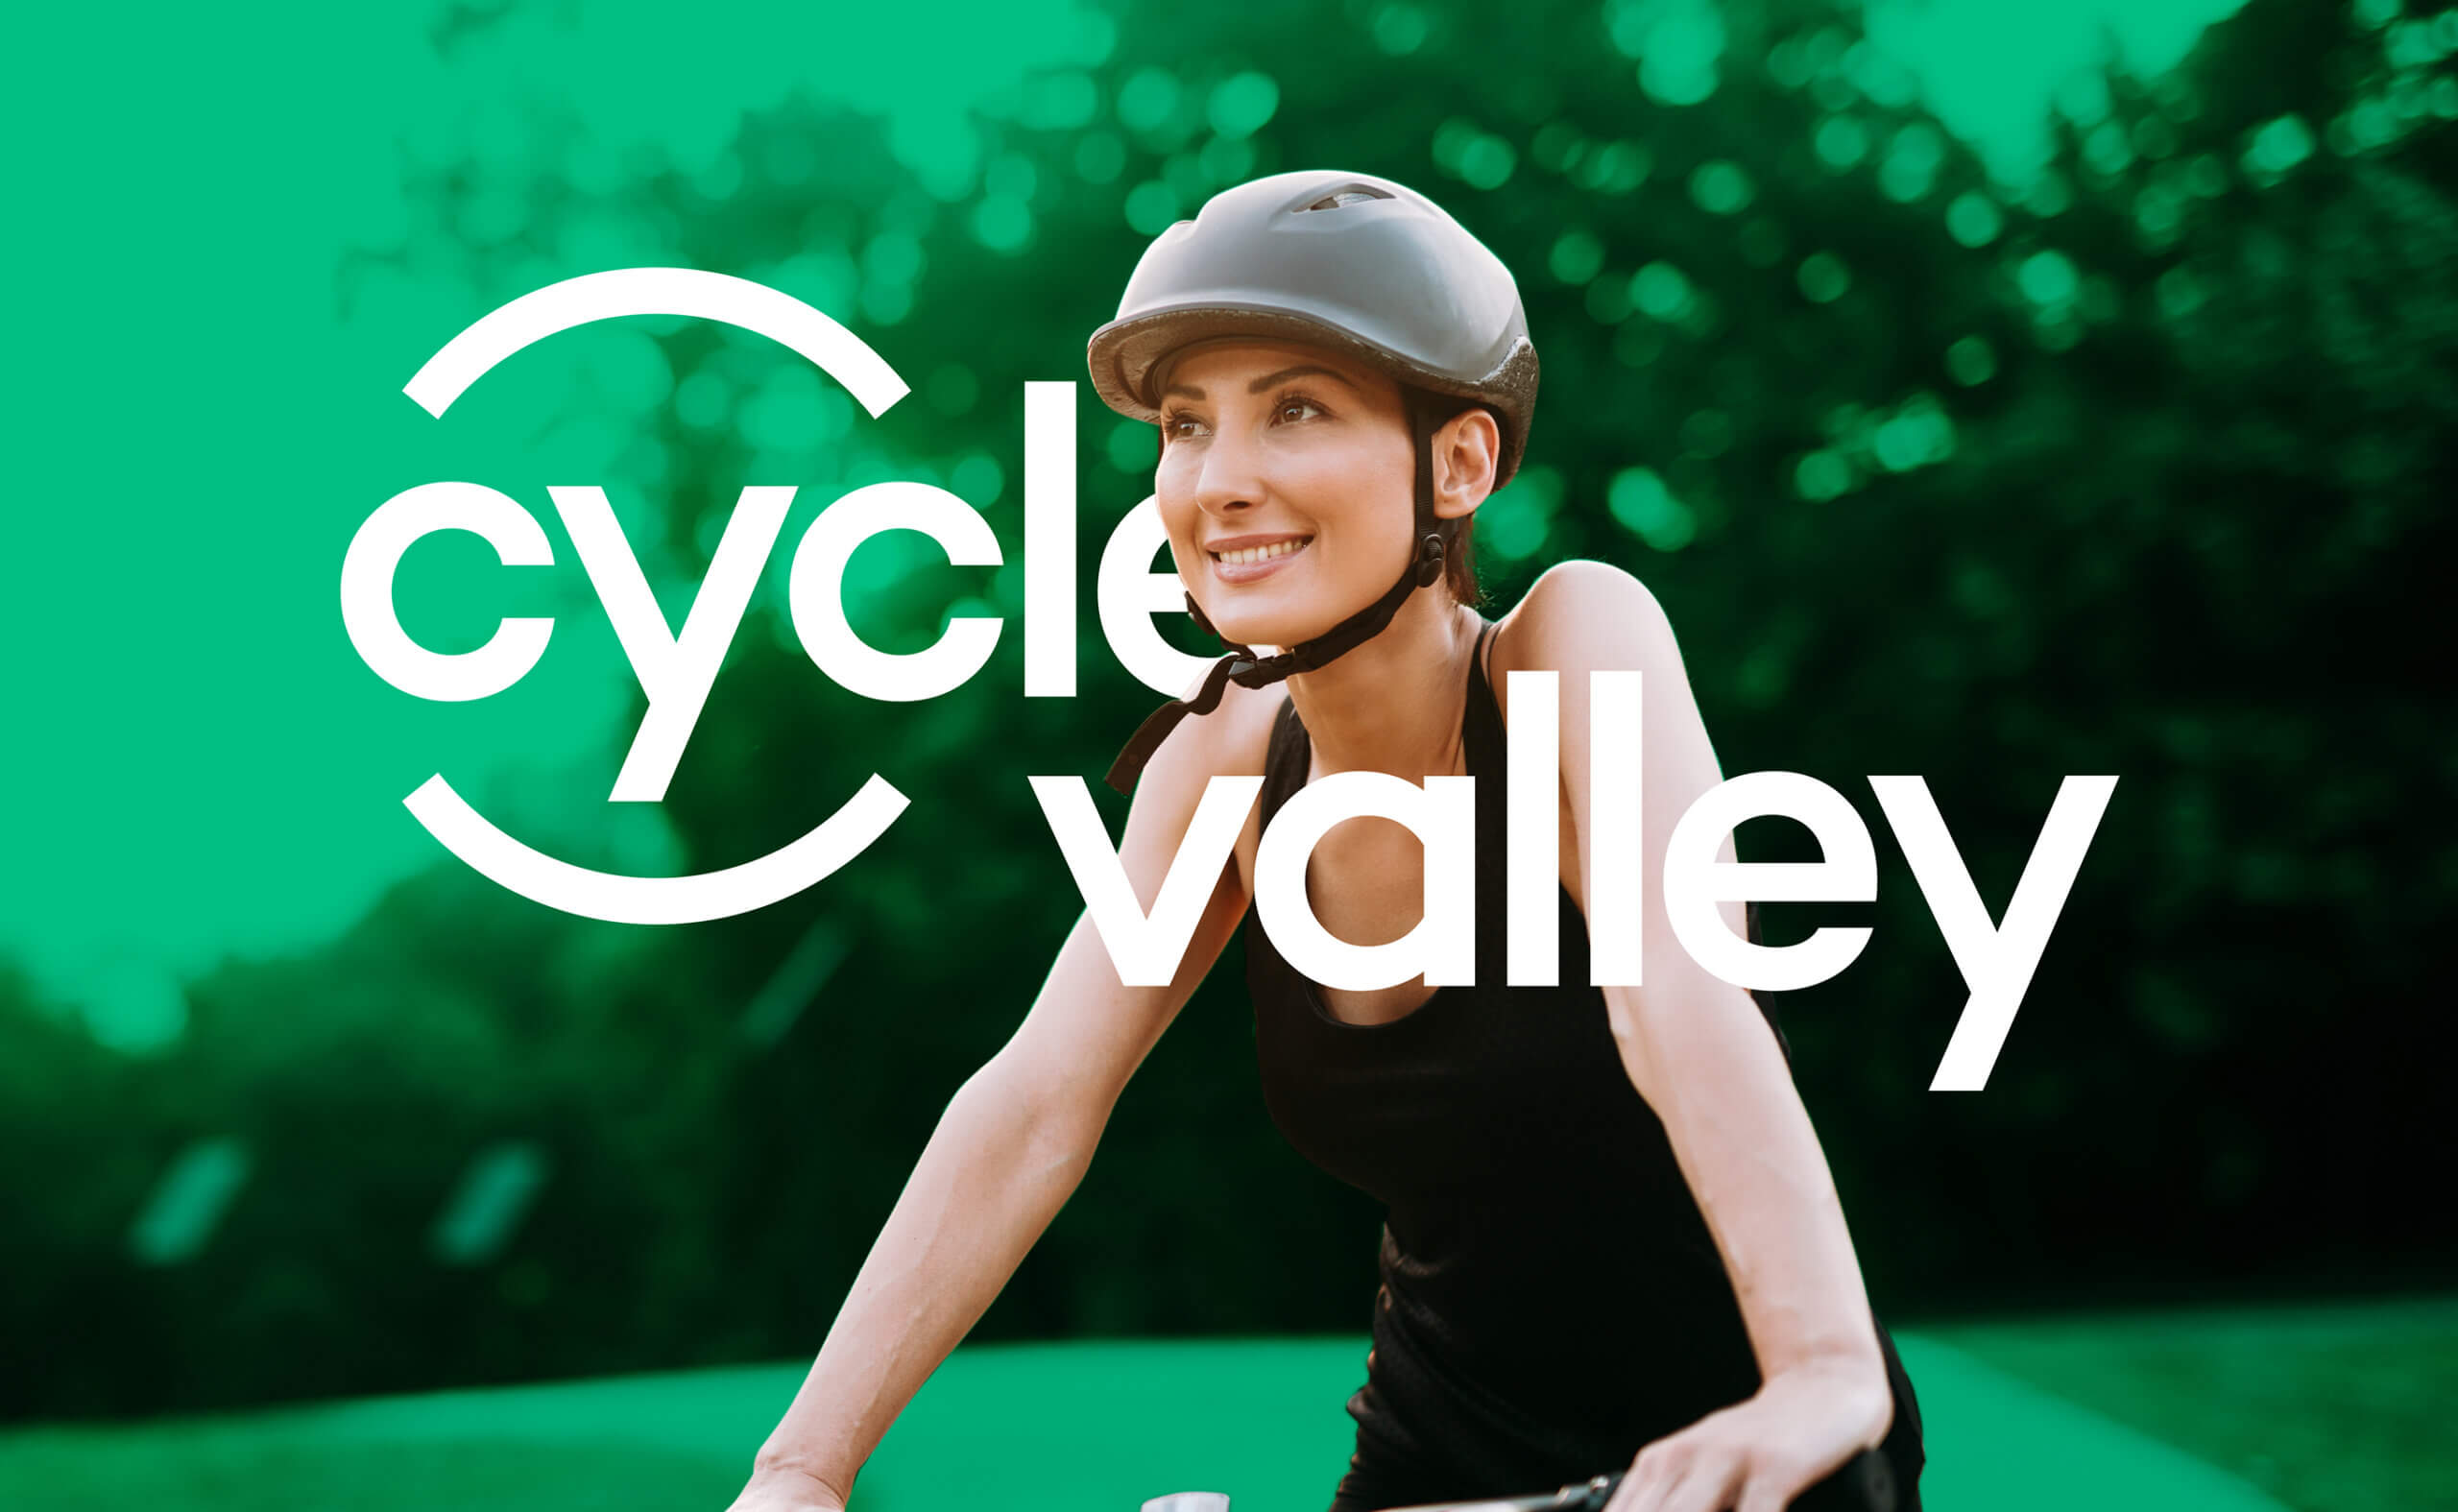 Cycle-Valley7